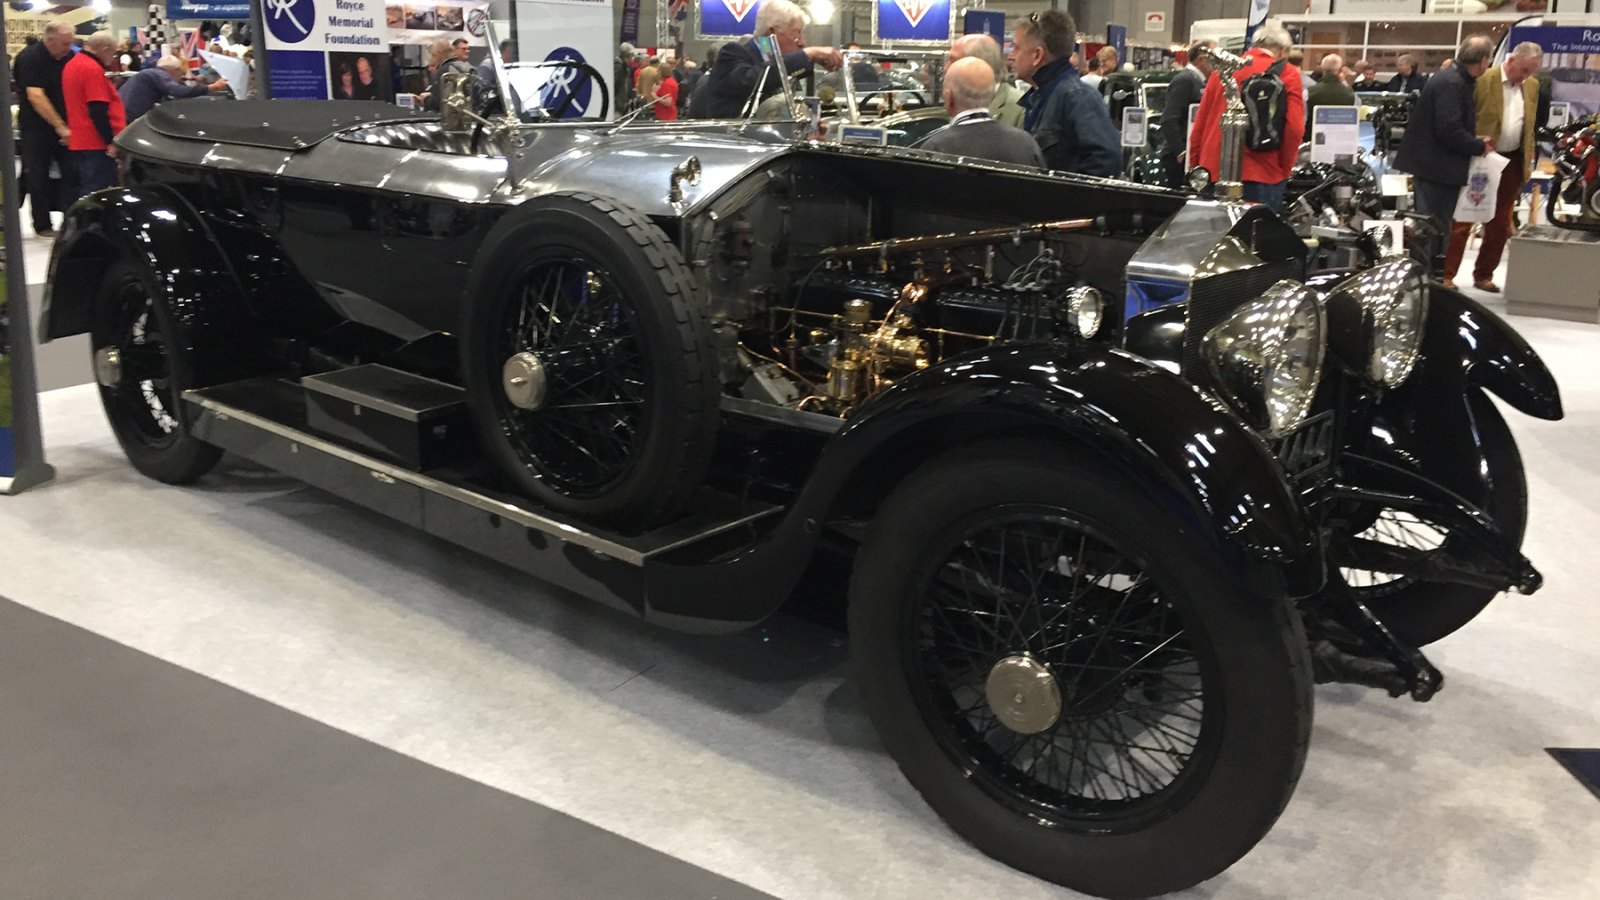 18 superb cars from the NEC Classic Motor Show 2019